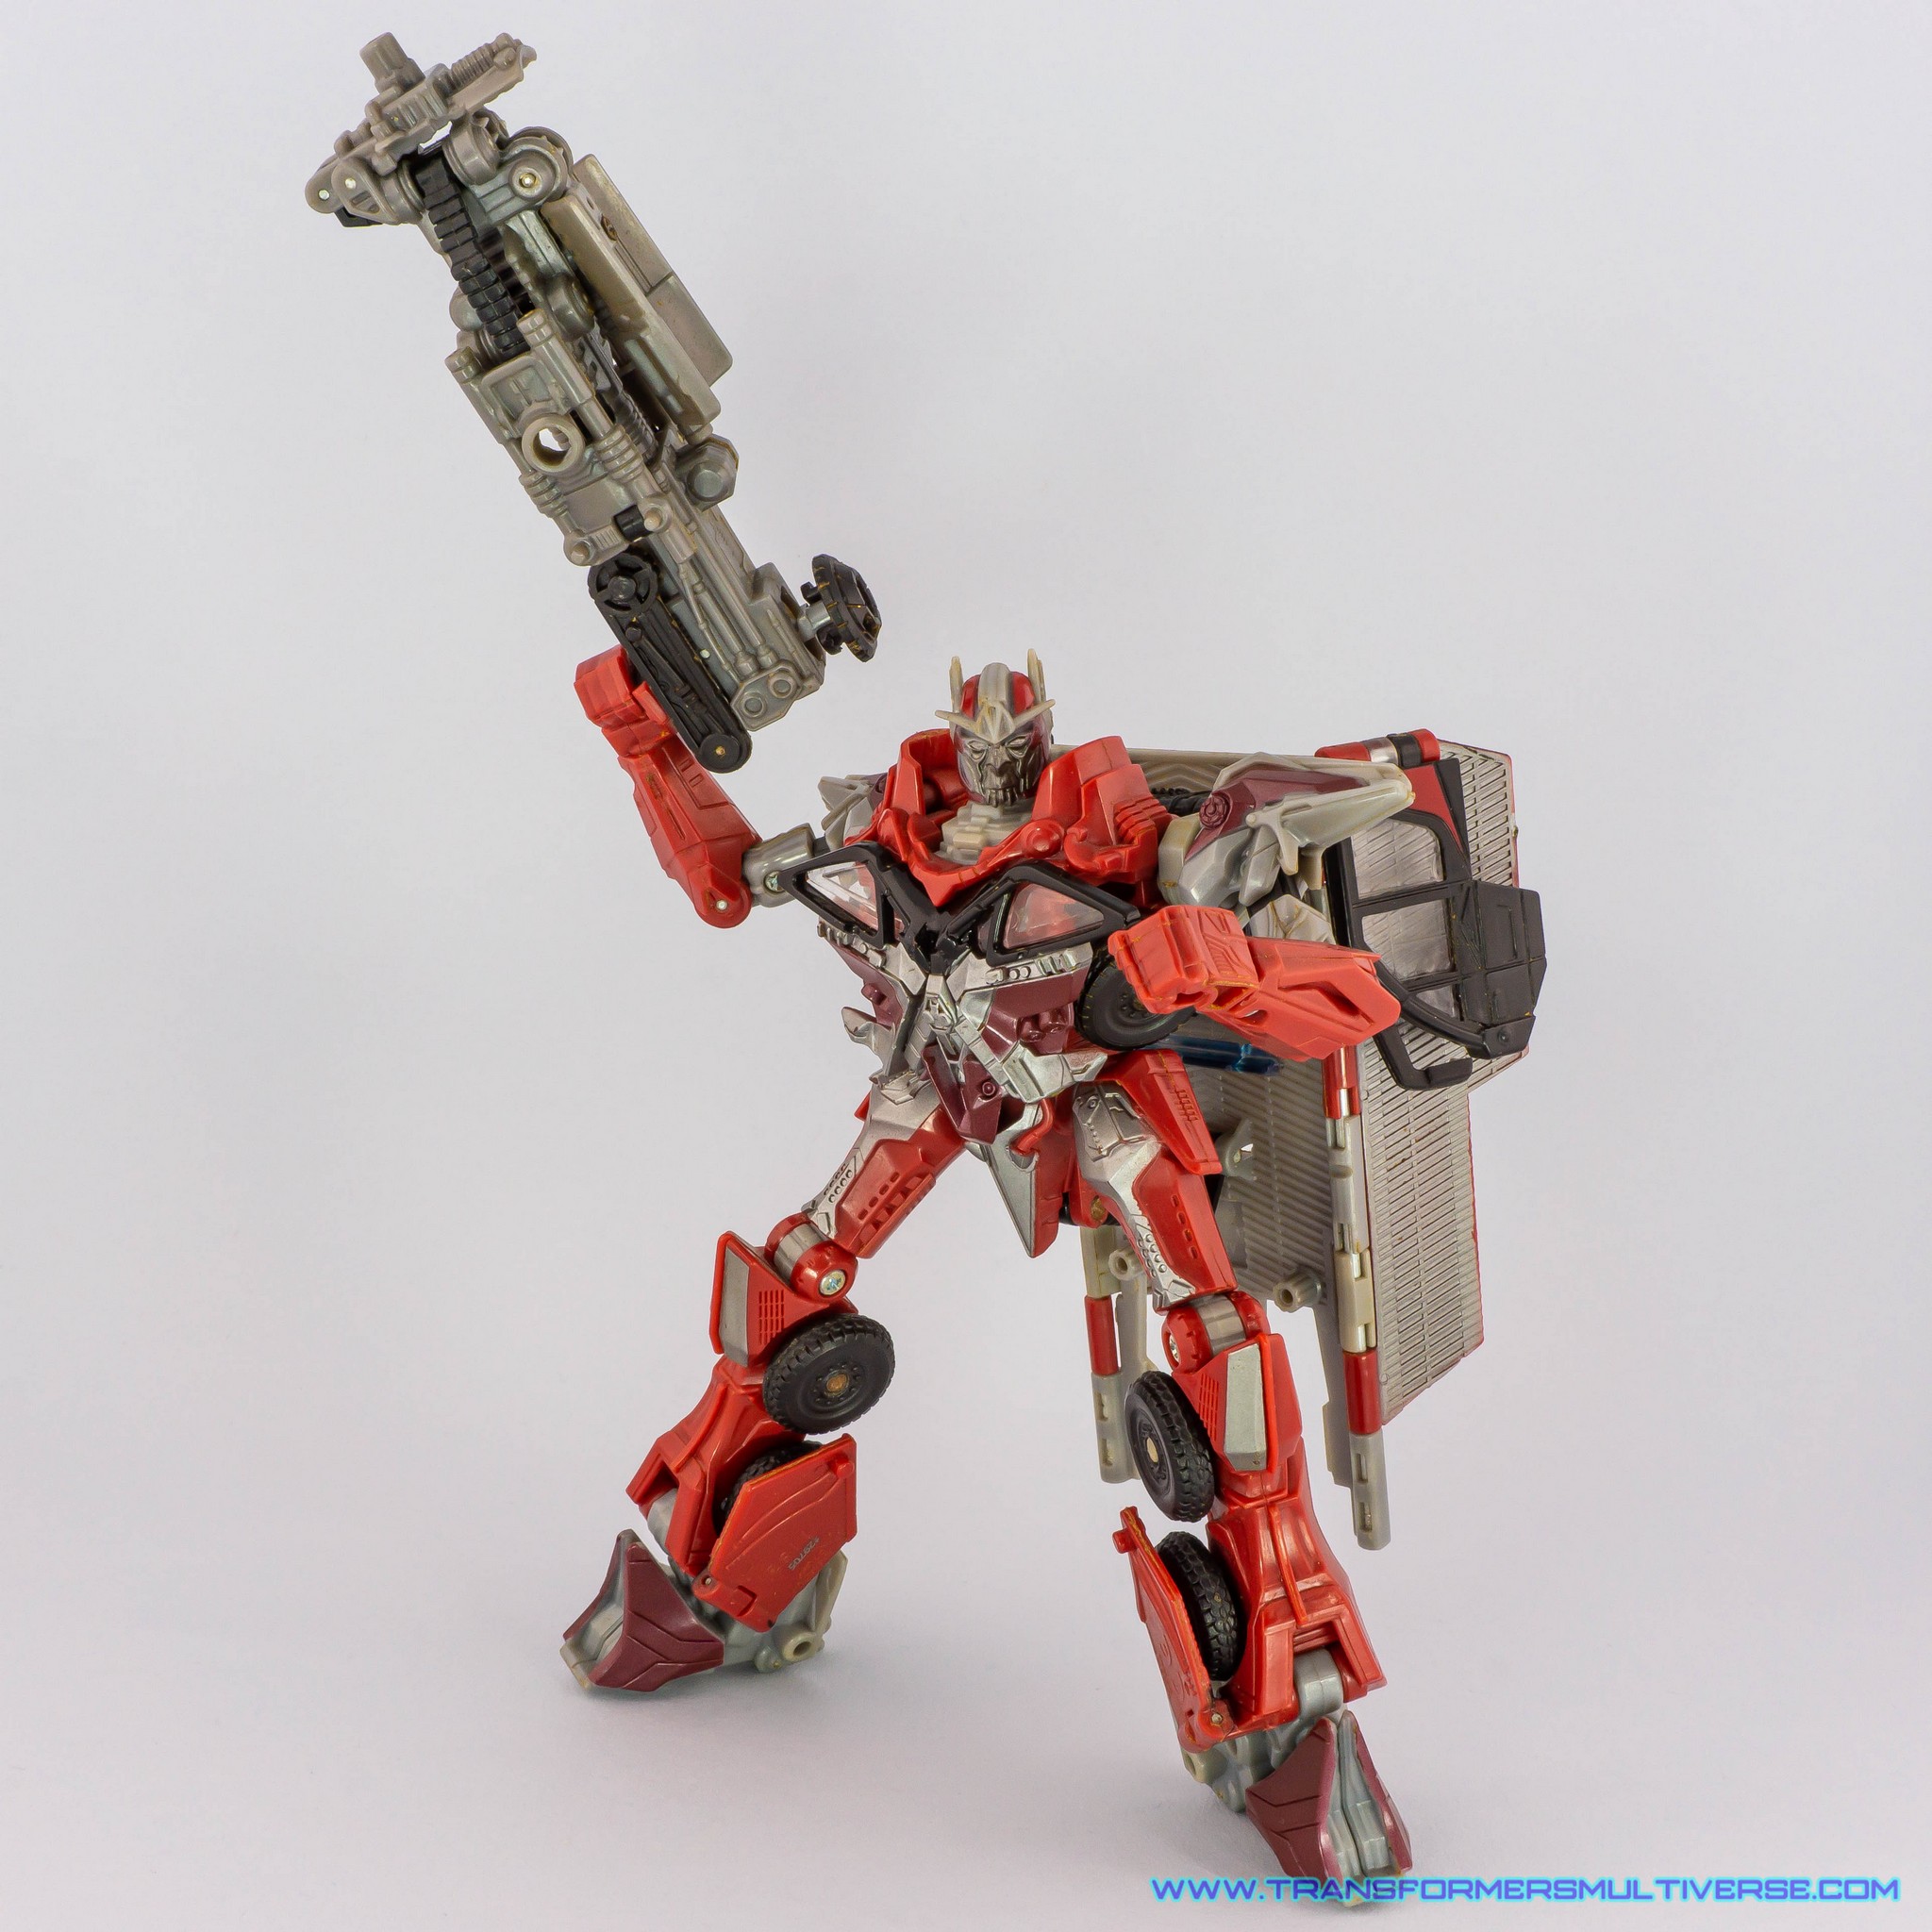 Transformers Dark of the Moon Sentinel Prime with MechTech rifle alternate pose